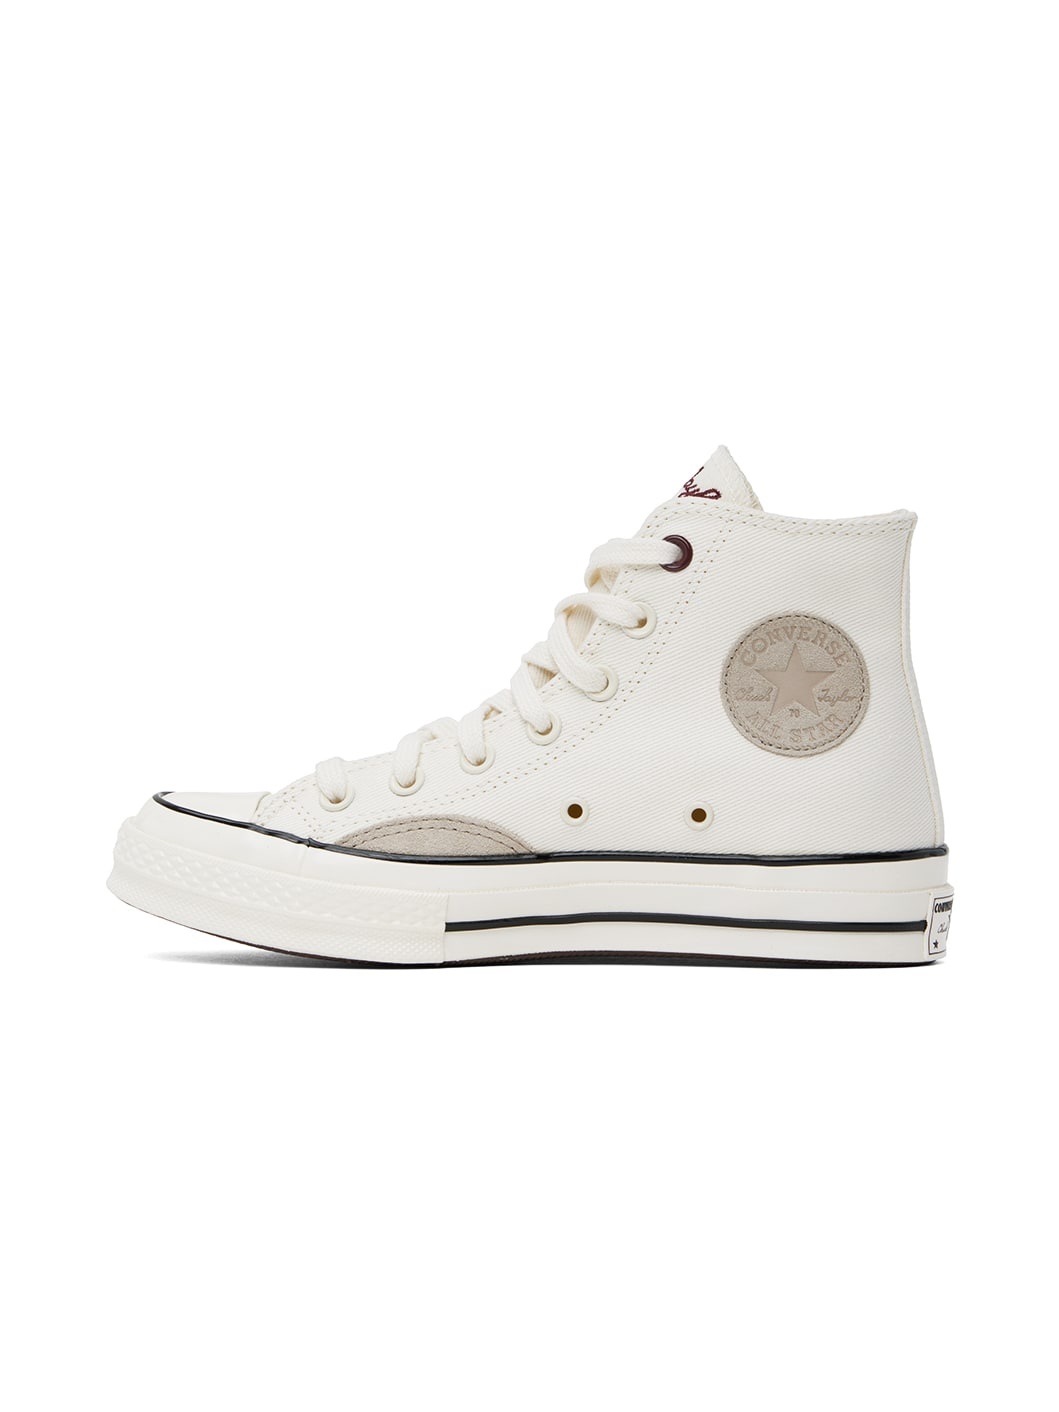 White & Taupe Chuck 70 Mixed Materials High Top Sneakers - 3